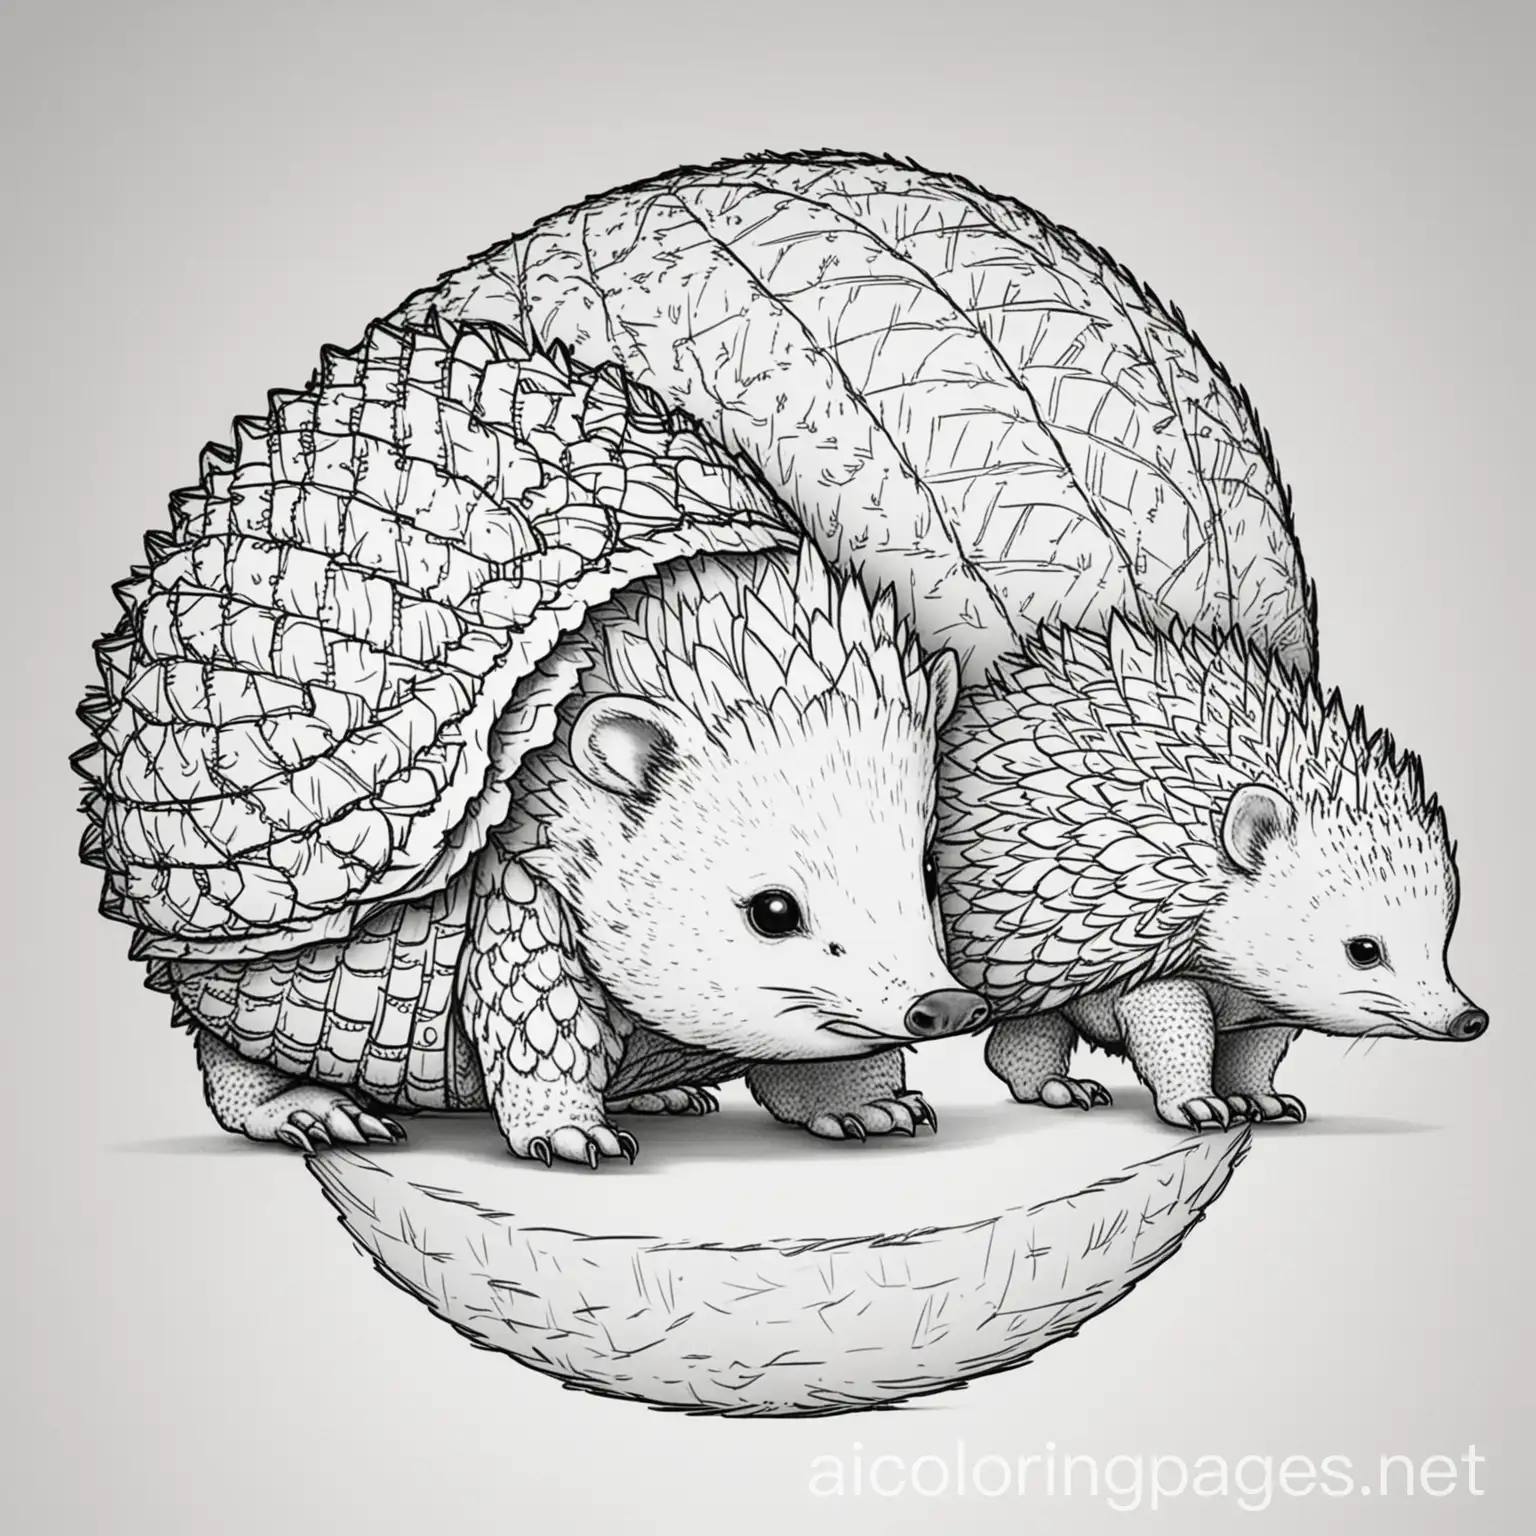 An armadillo hedgehog and  pangolin are friends they do dances to show how they can roll up in a ball and bounce out. , Coloring Page, black and white, line art, white background, Simplicity, Ample White Space. The background of the coloring page is plain white to make it easy for young children to color within the lines. The outlines of all the subjects are easy to distinguish, making it simple for kids to color without too much difficulty